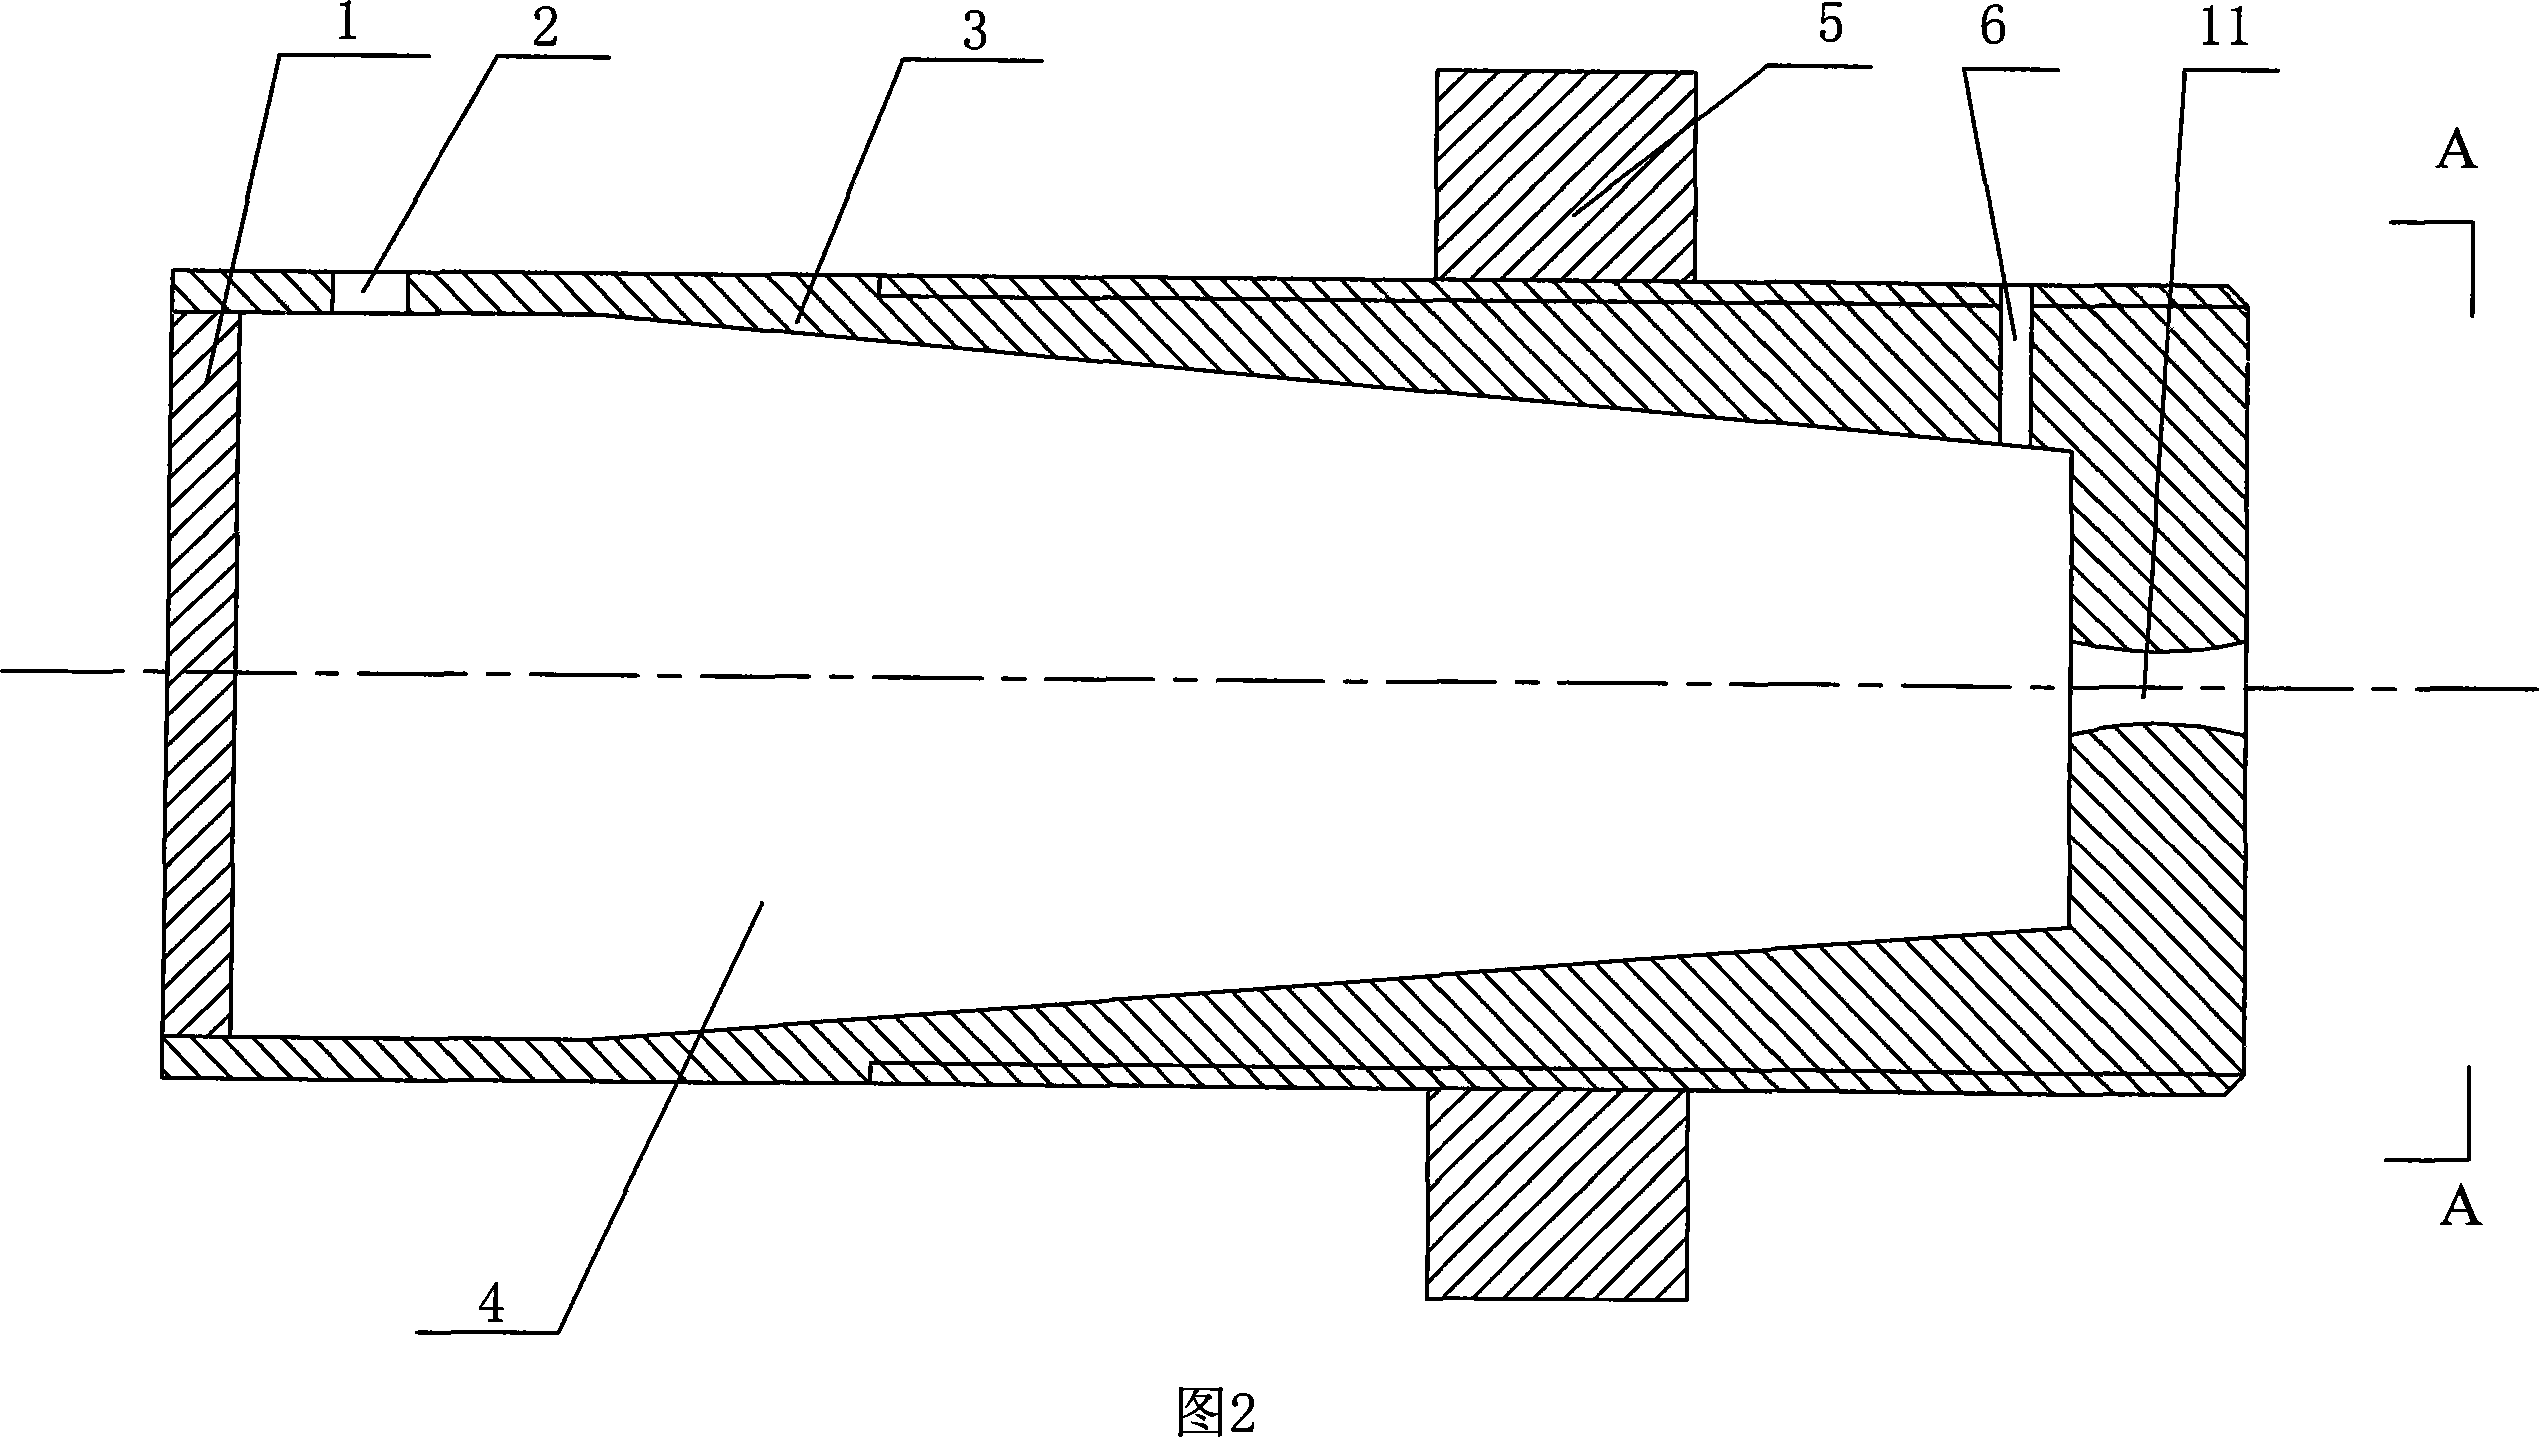 Bond type anchorage and anchoring method for anchoring fibre reinforced plastic reinforcement or bracing cable